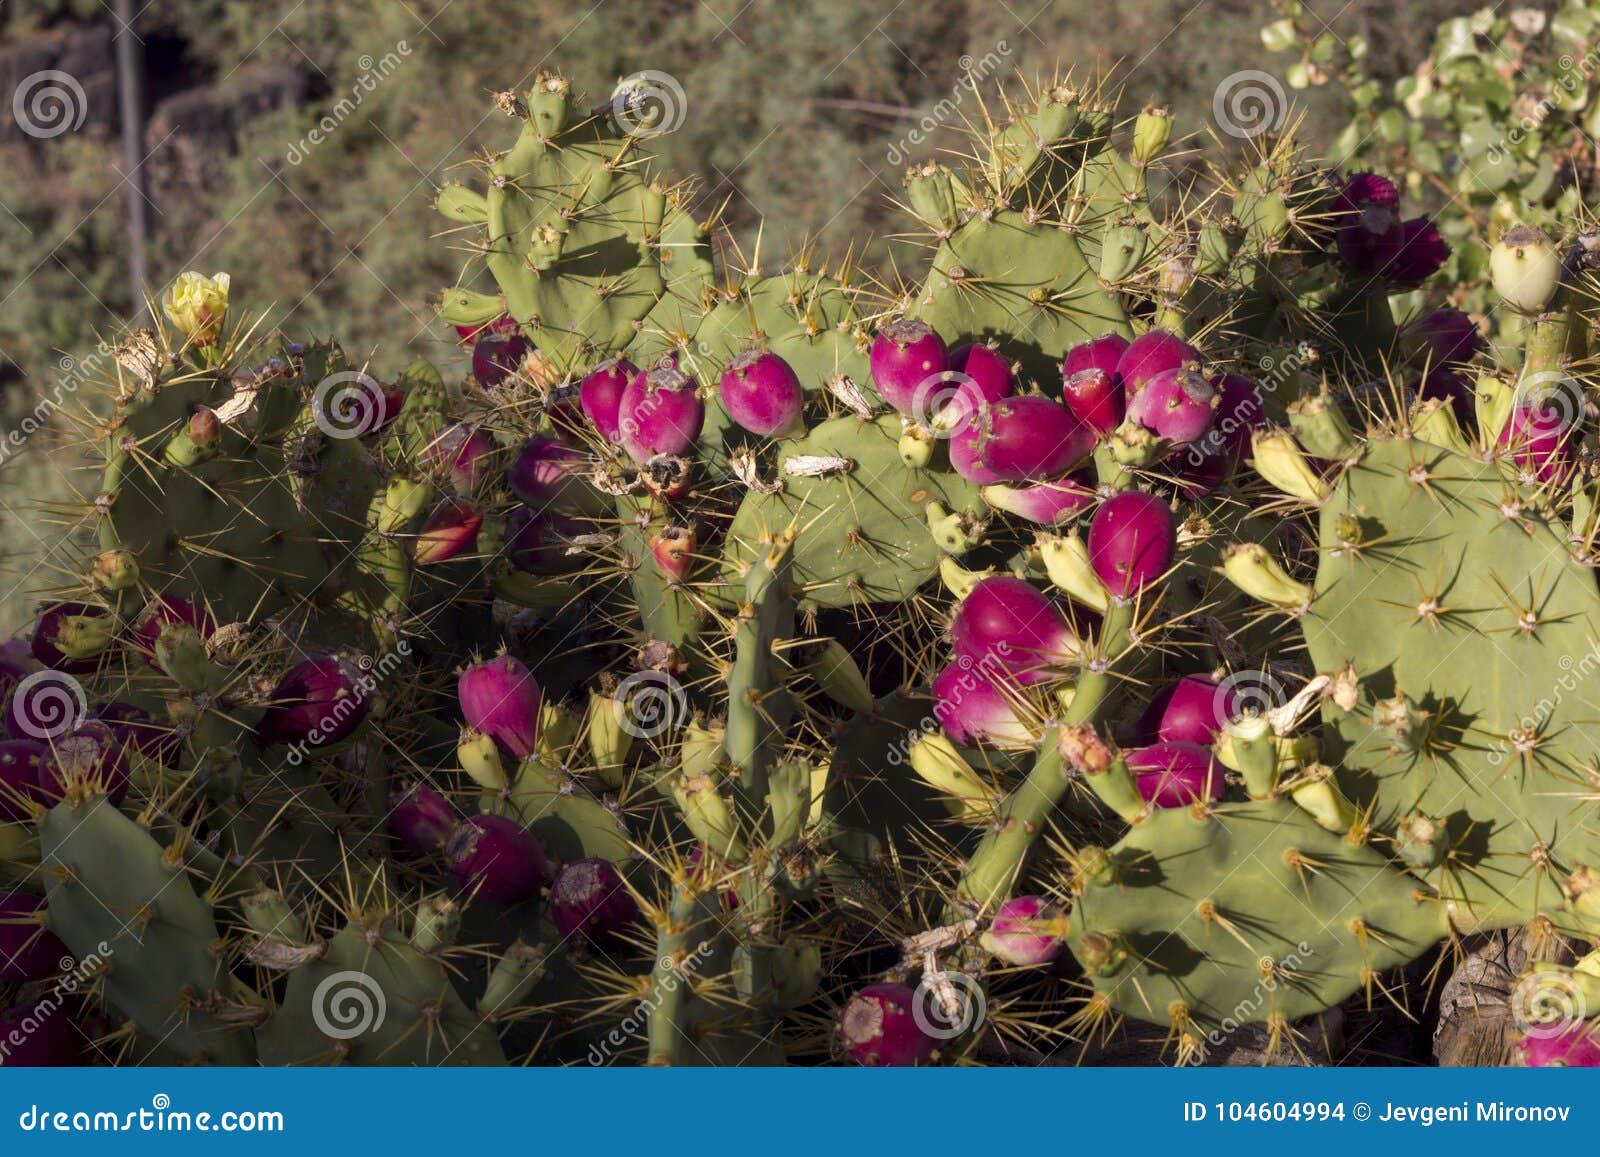 cluster of prickly pears or higo cactuses edible fruits. tropic